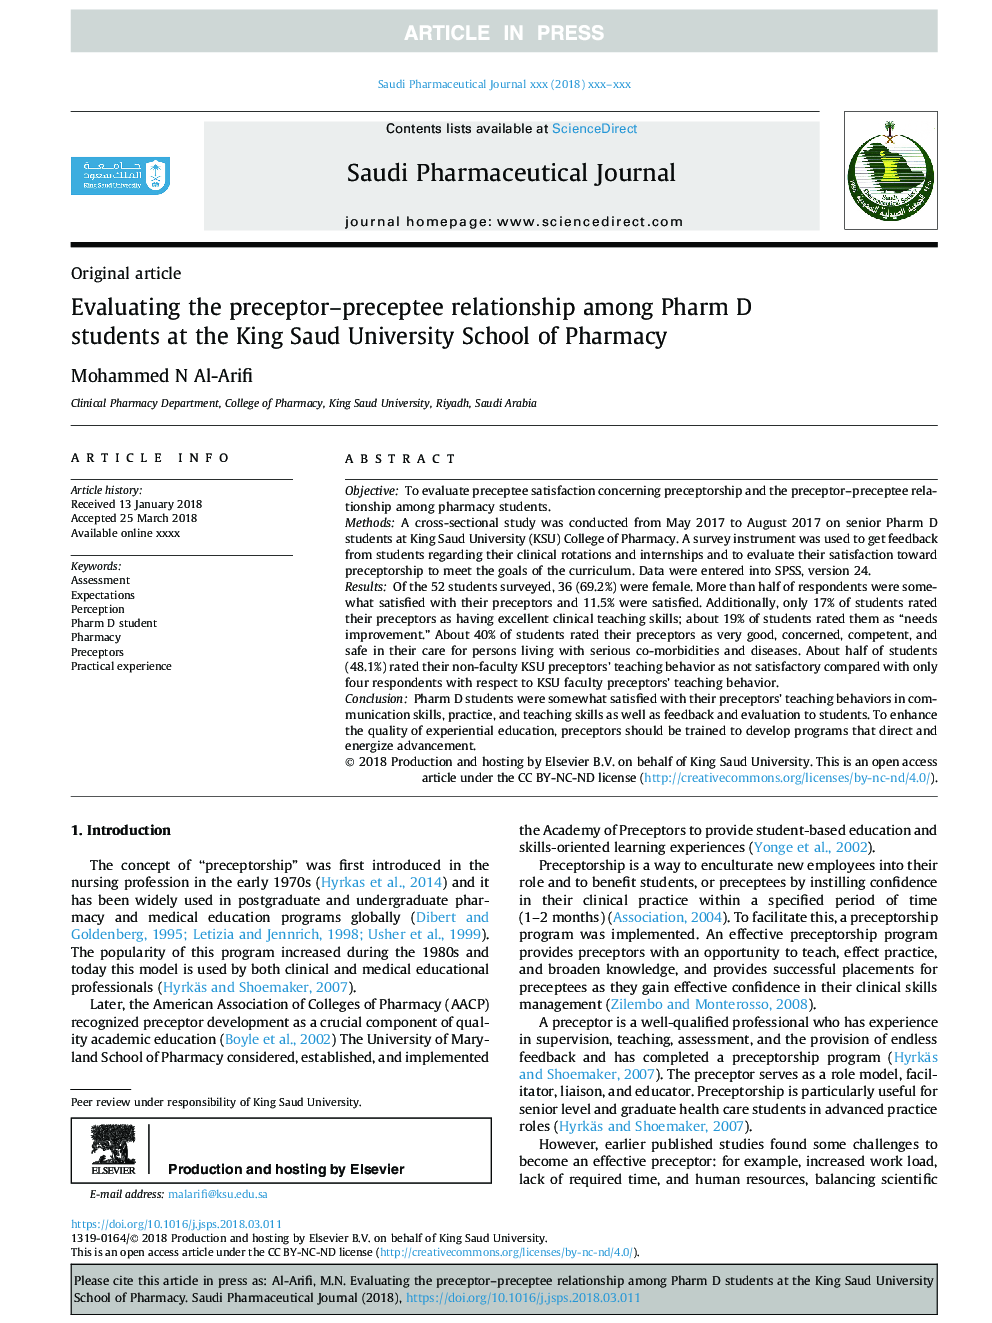 Evaluating the preceptor-preceptee relationship among Pharm D students at the King Saud University School of Pharmacy